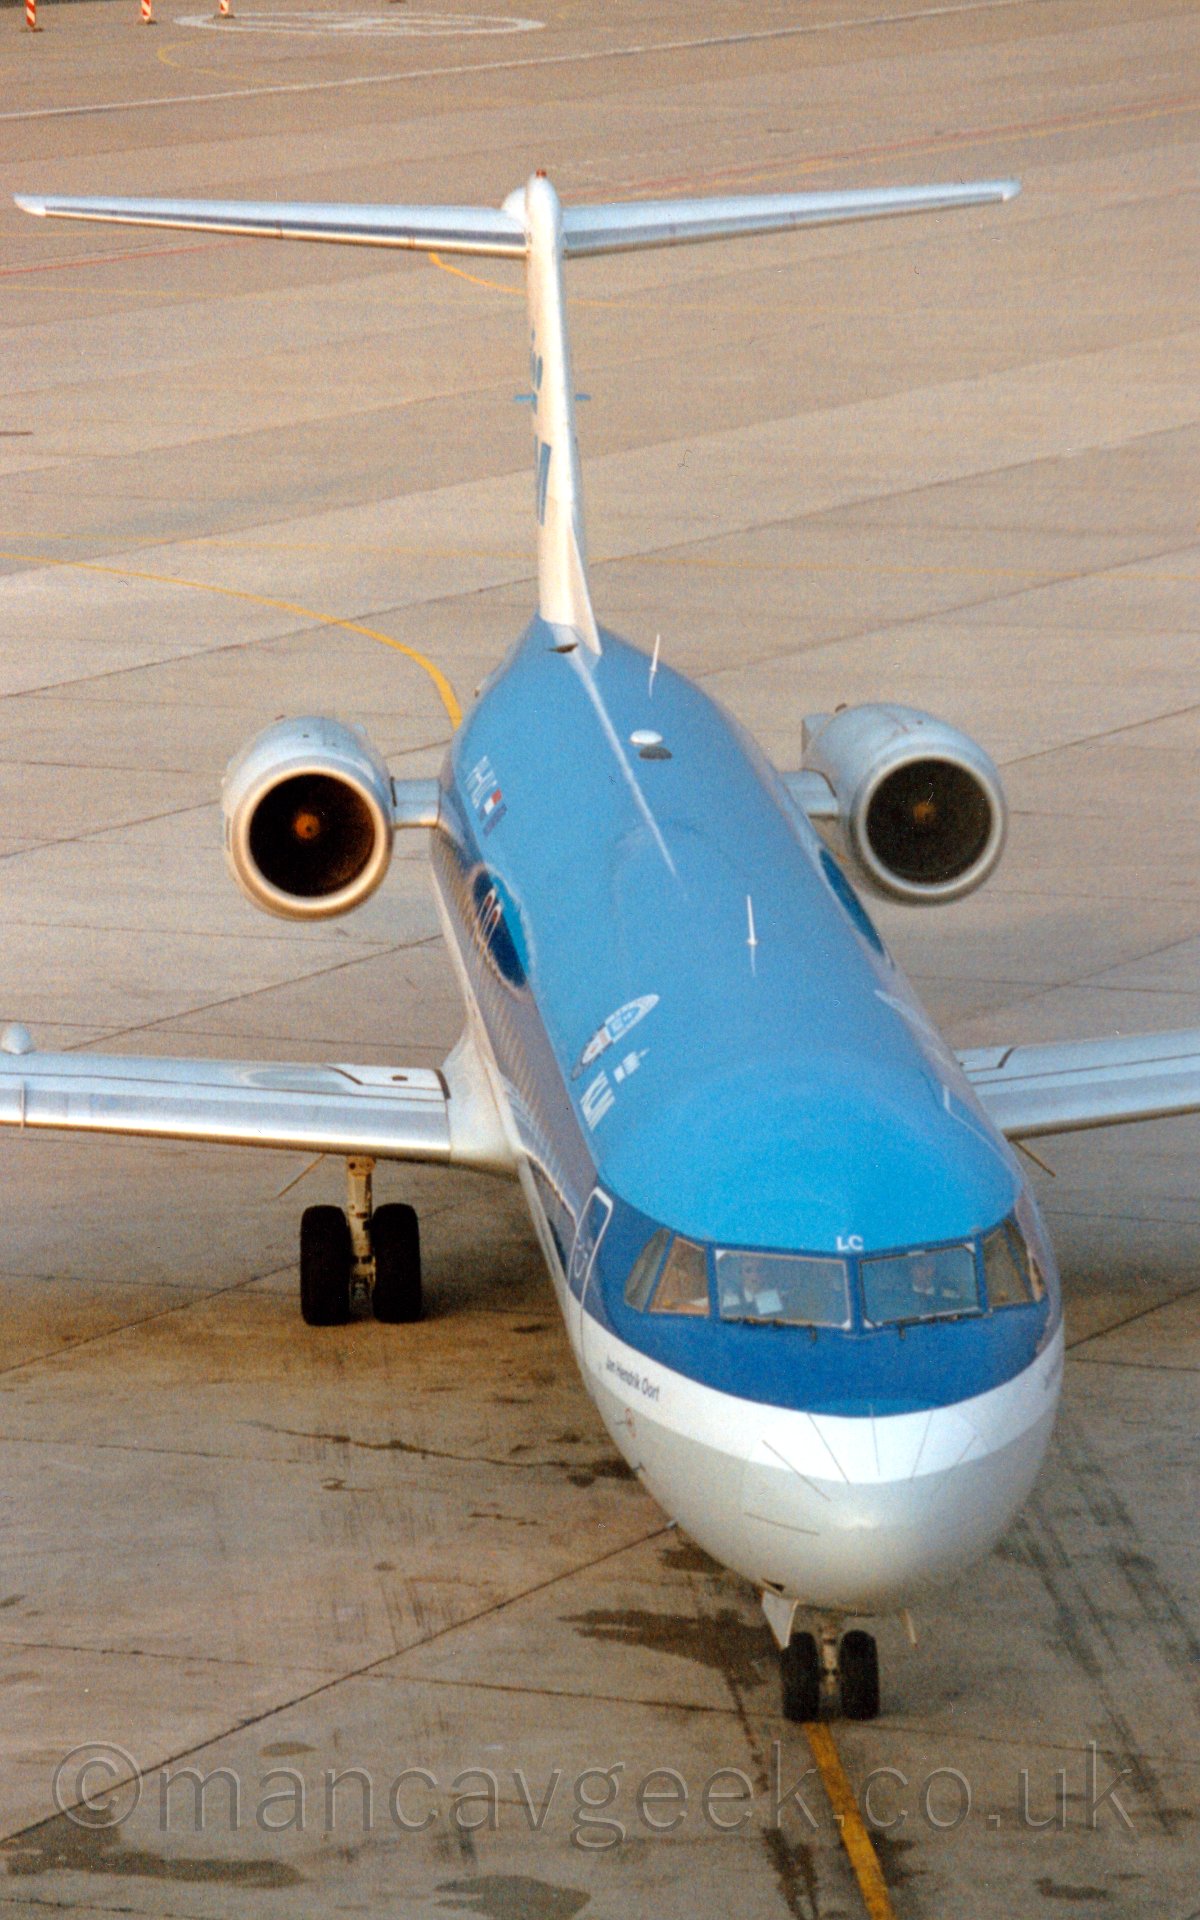 High front view of a t-tailed twin-engined jet airliner taxiing to a spot almost directly below the camera. The plane has a light blue upper section with a grey belly, and thick dark blue and white stripes running the the length of the body with white "KLM" titles under a white crown on the upper forward fuselage.